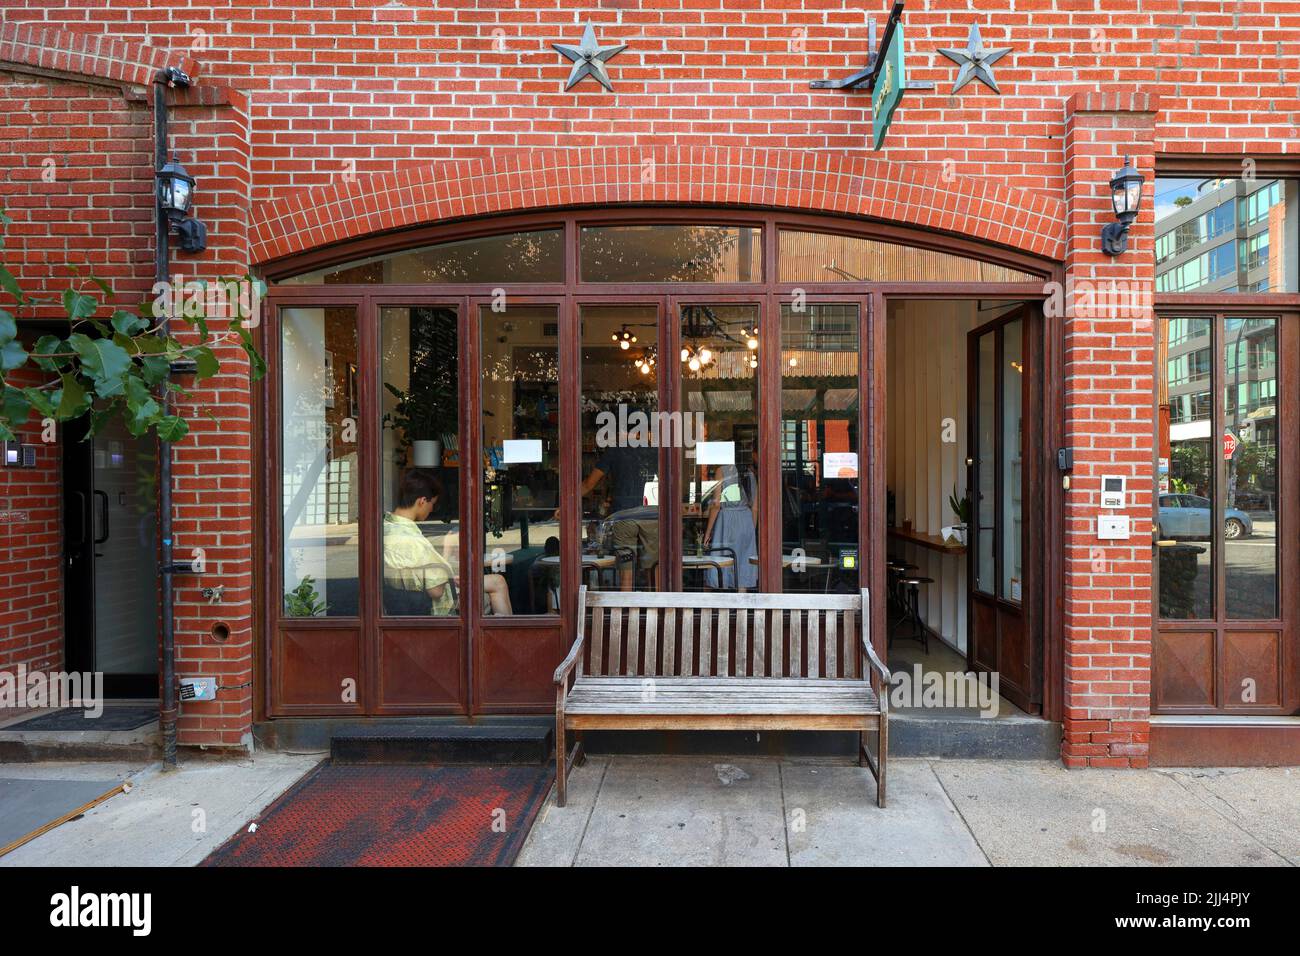 Ovenly, 31 Greenpoint Ave, Brooklyn, NY. exterior storefront of a bake shop in Greenpoint. Stock Photo